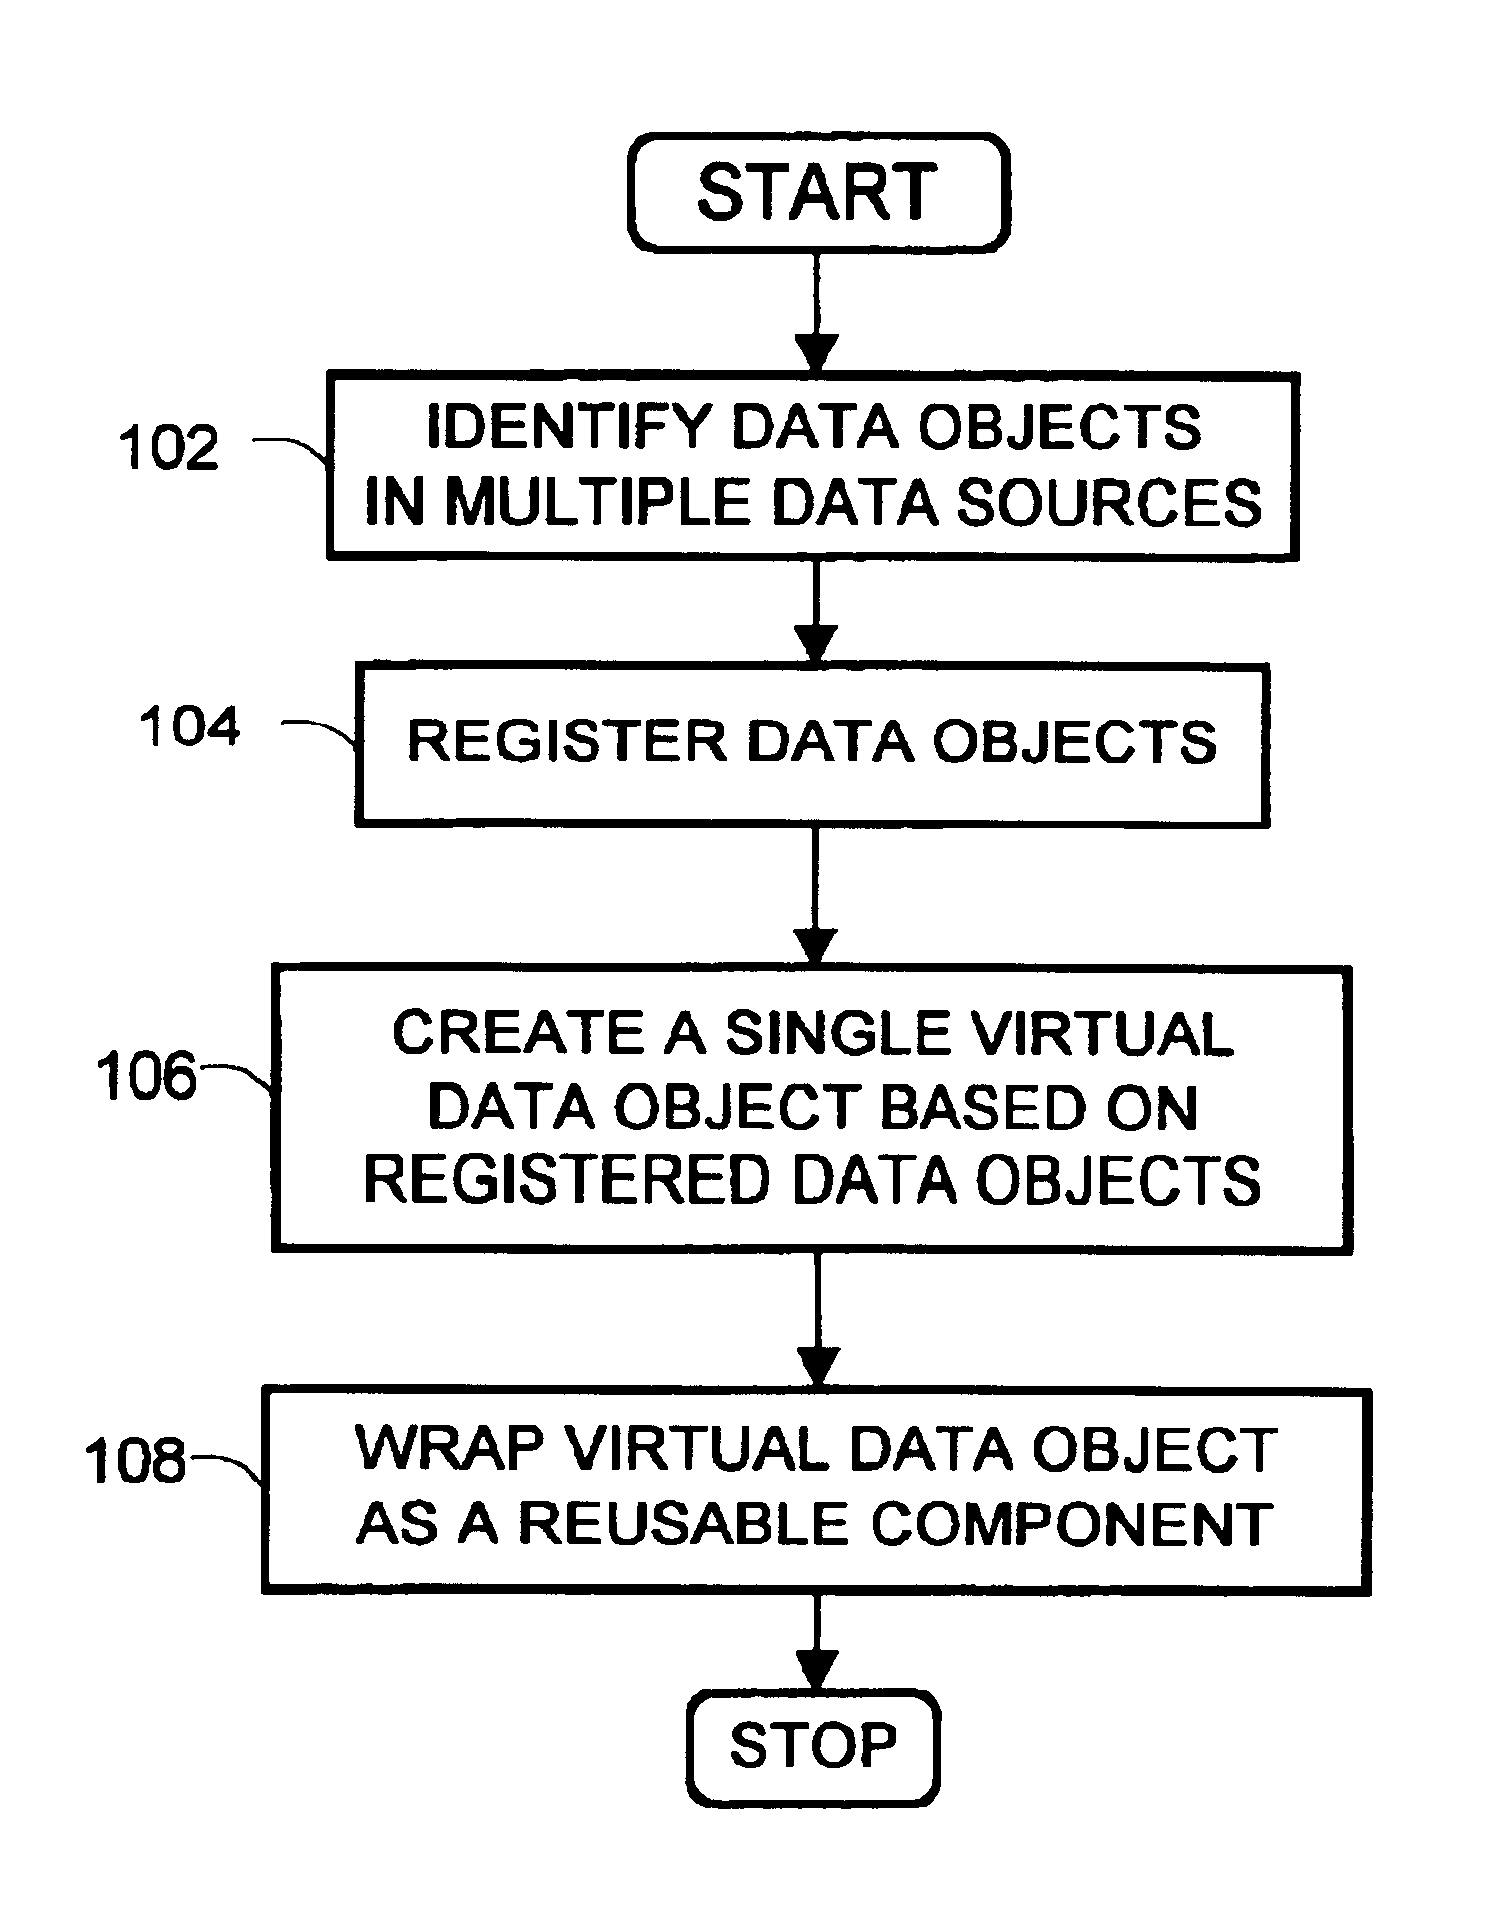 Mapping data from multiple data sources into a single software component